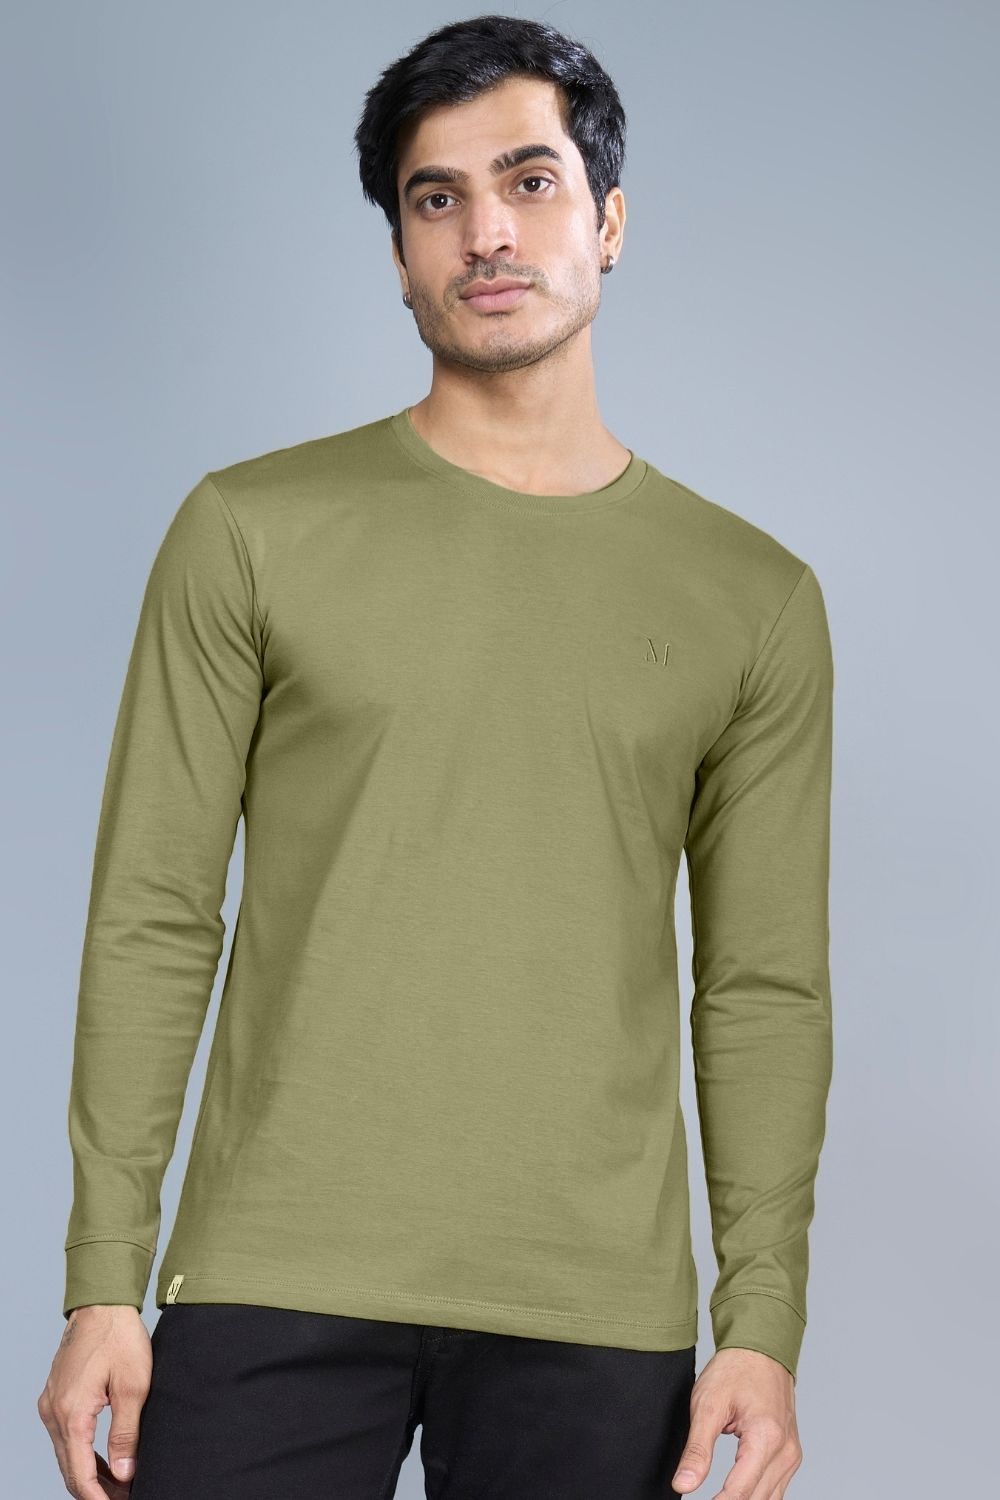 Forest green colored, full sleeve solid T shirt for Men with round neck, front view.